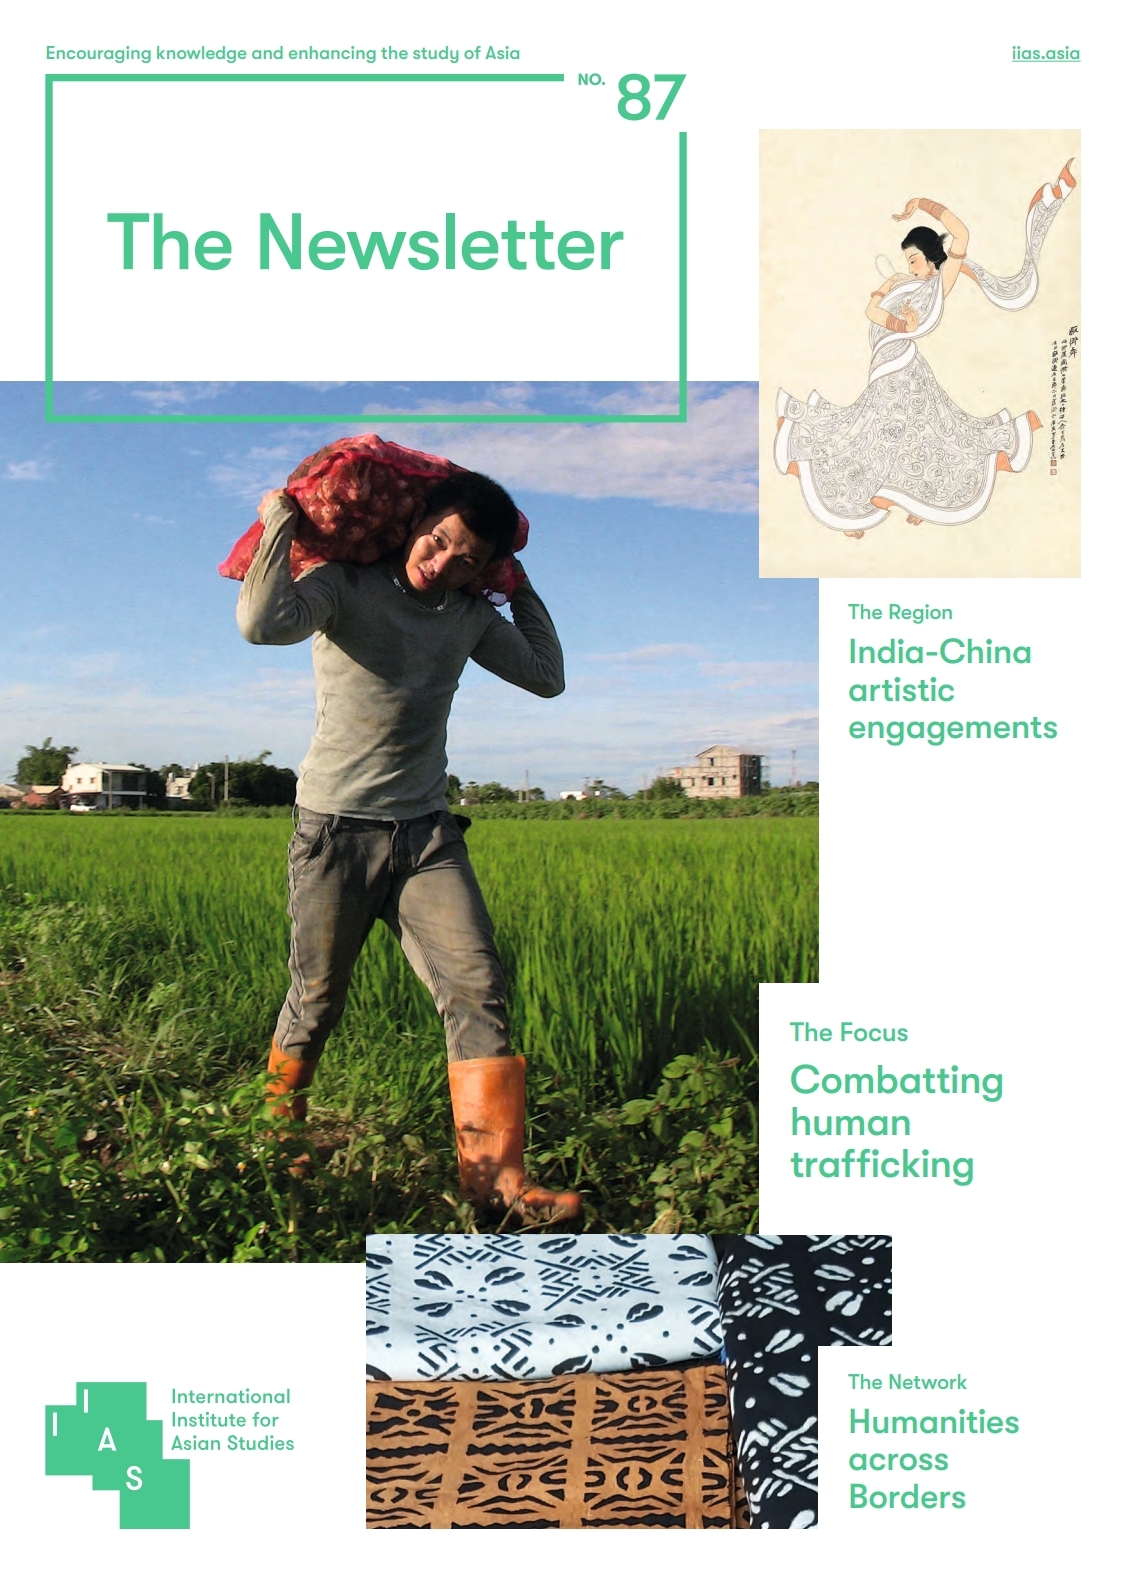 IIAS 〈The Newsletter〉 Vol. 87 – News from Northeast Asia